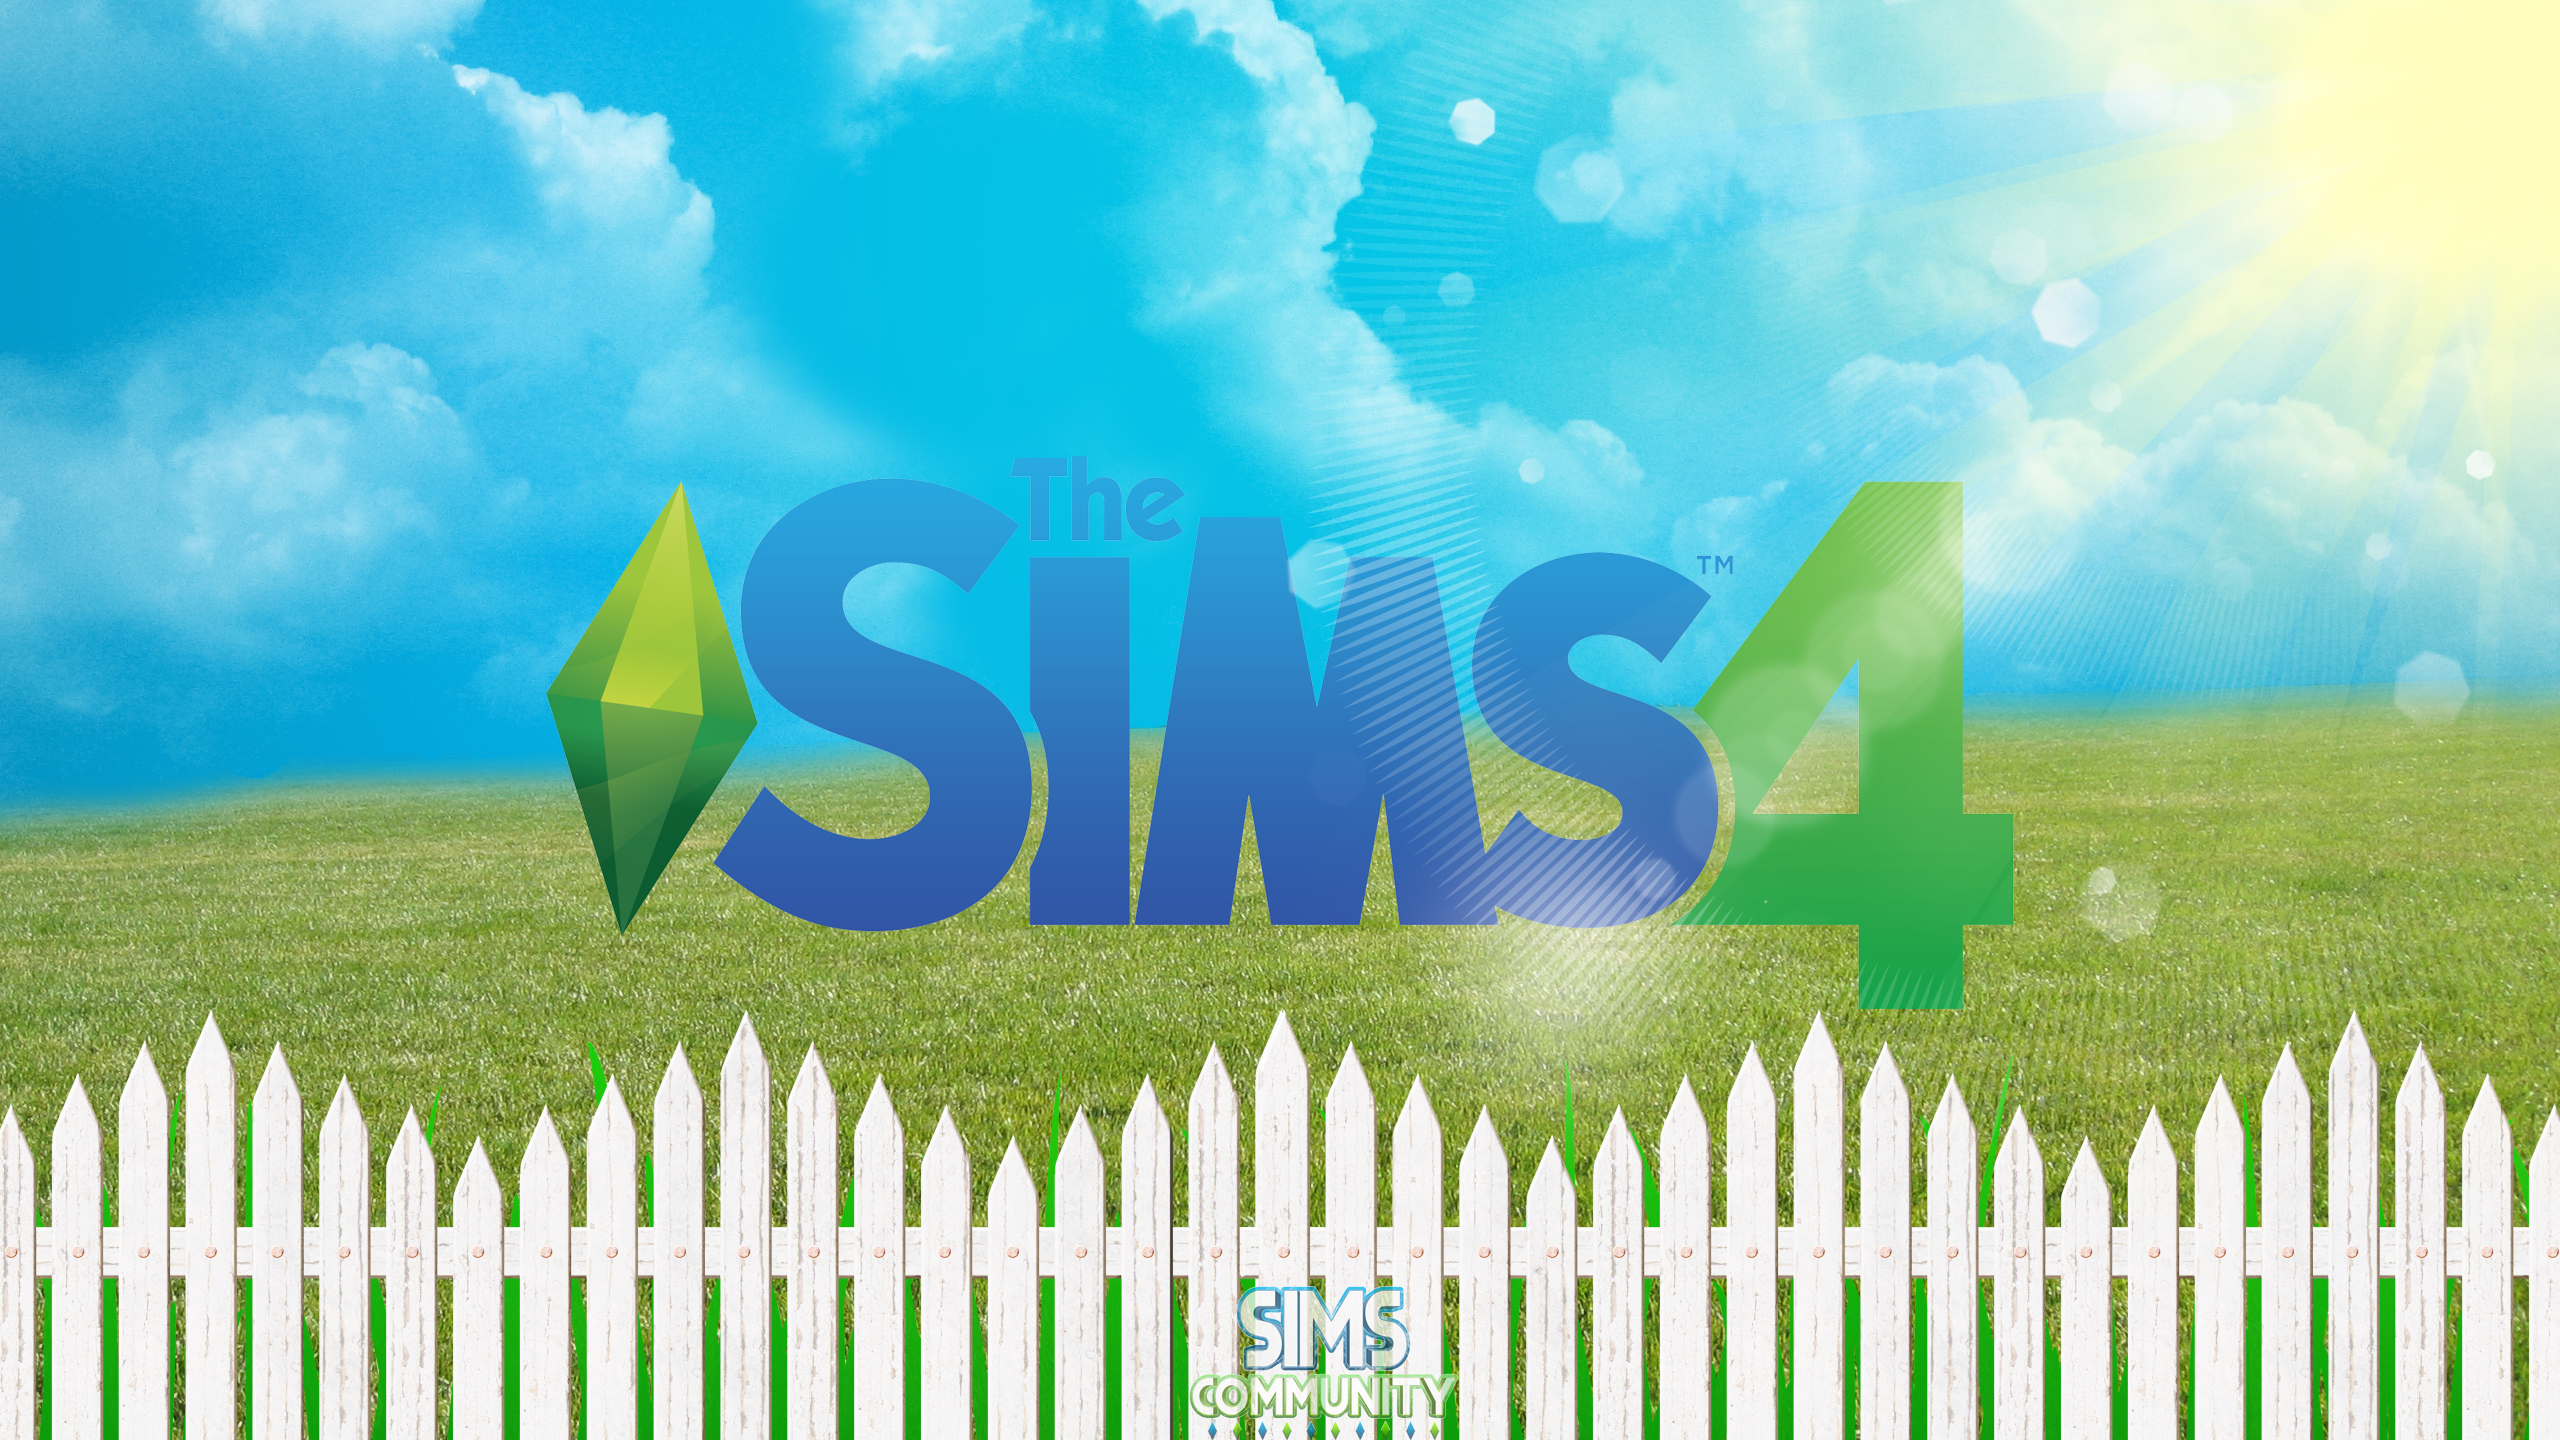 Image About Pin That Wall The Sims